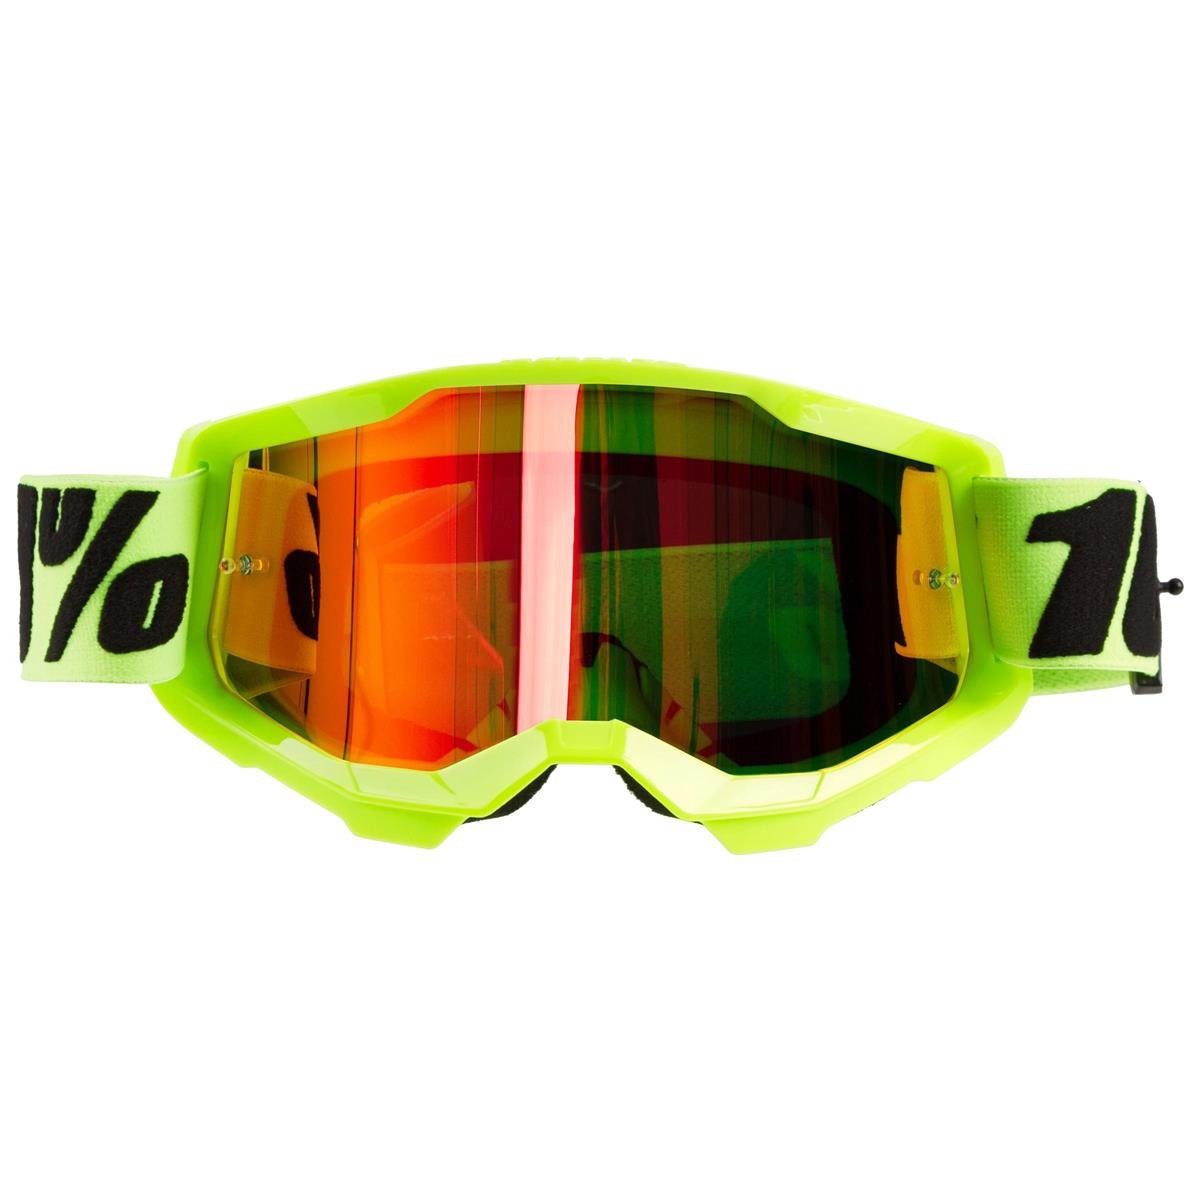 Neon Yellow/Mirror Gold,One Size Fits Most 100% Unisex-Adult Strata Junior MX Motocross Goggles 